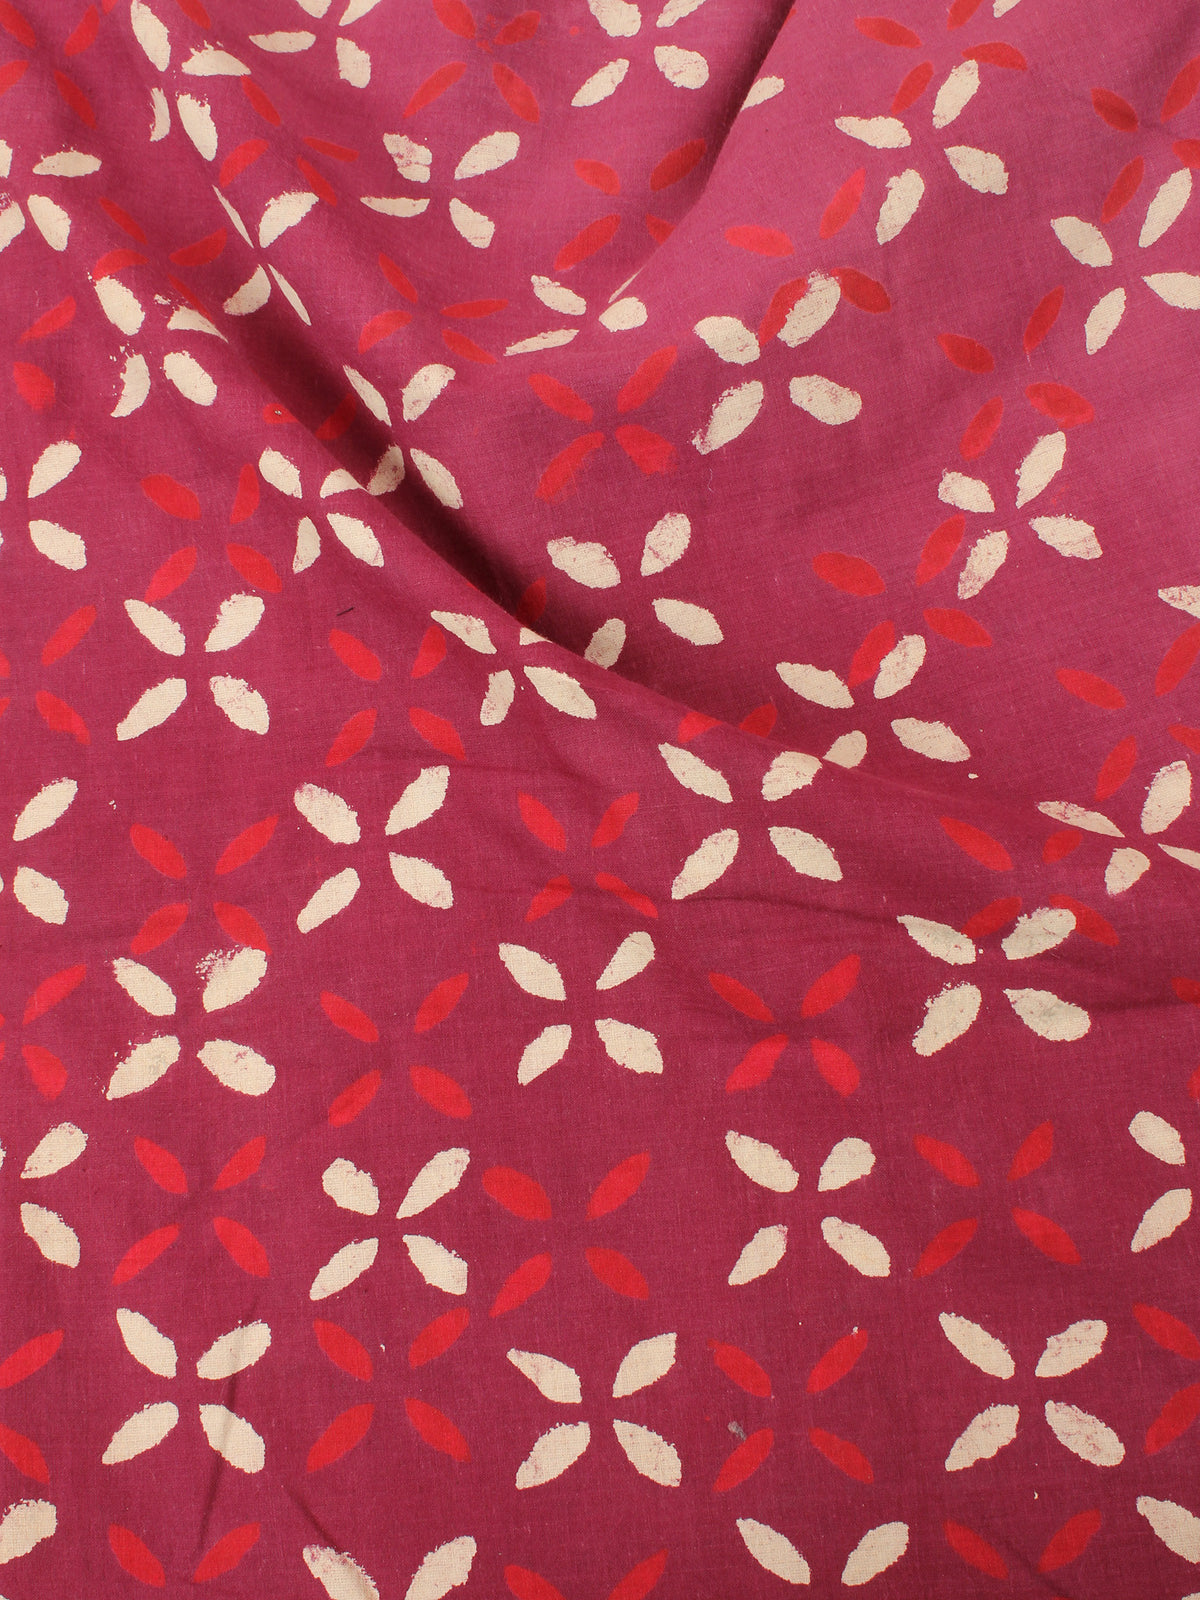 Red Beige Natural Dyed Hand Block Printed Cotton Fabric Per Meter - F0916216